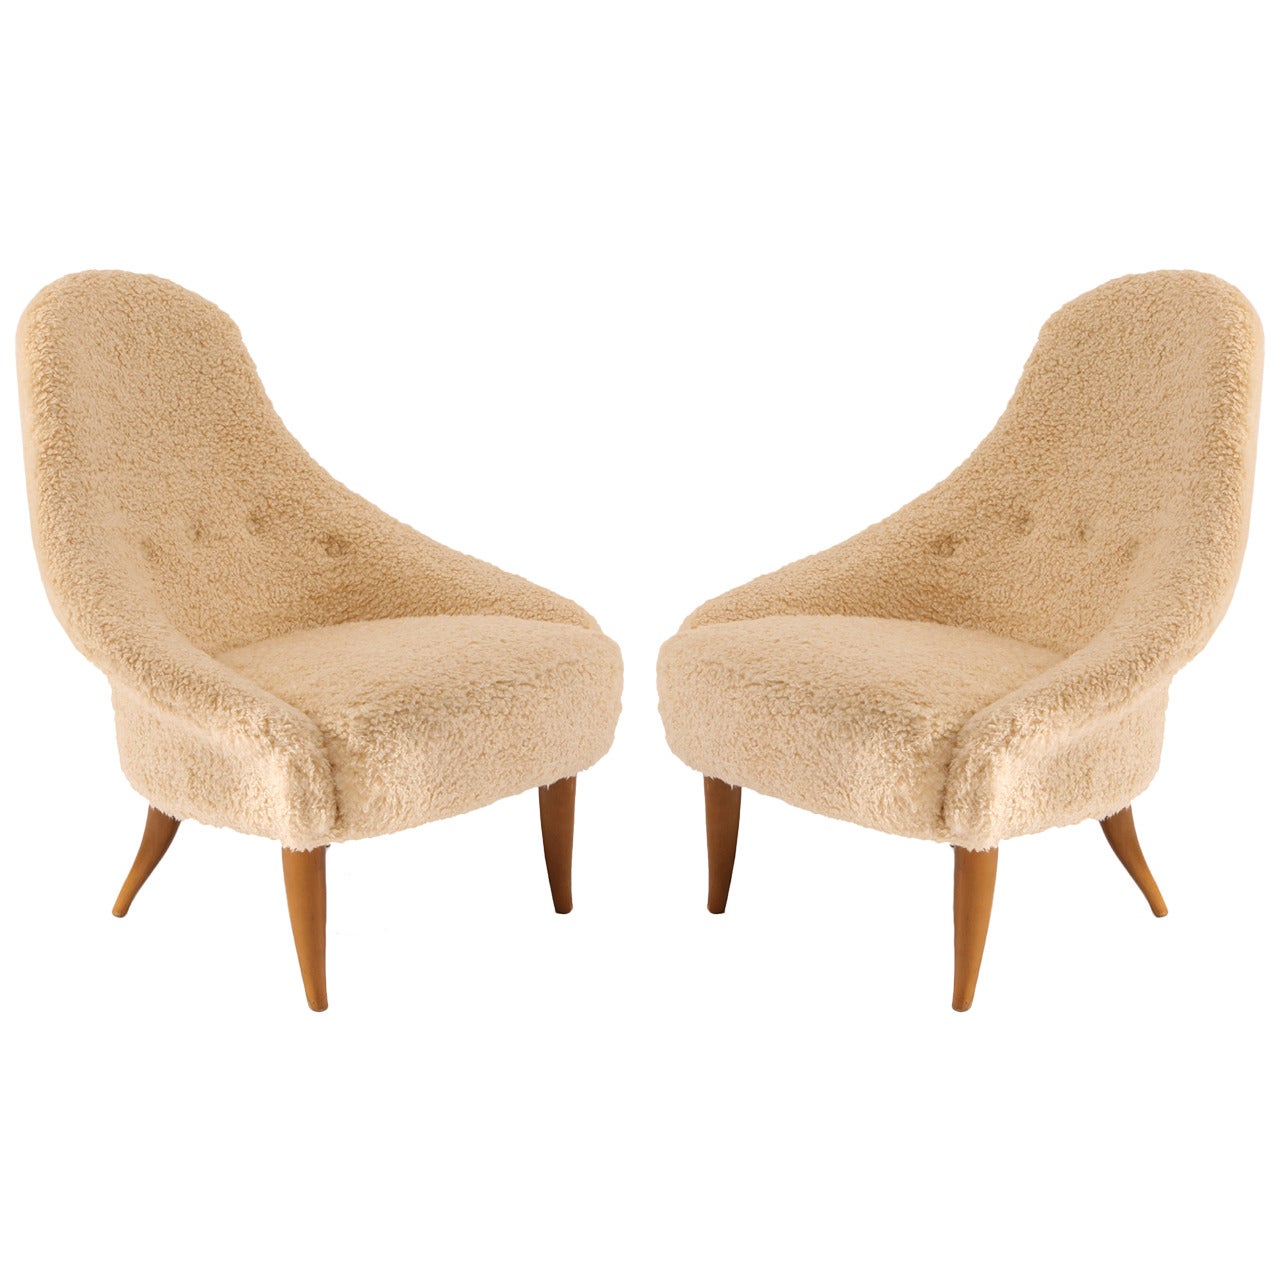 Pair of Lounge Chairs by Holmquist